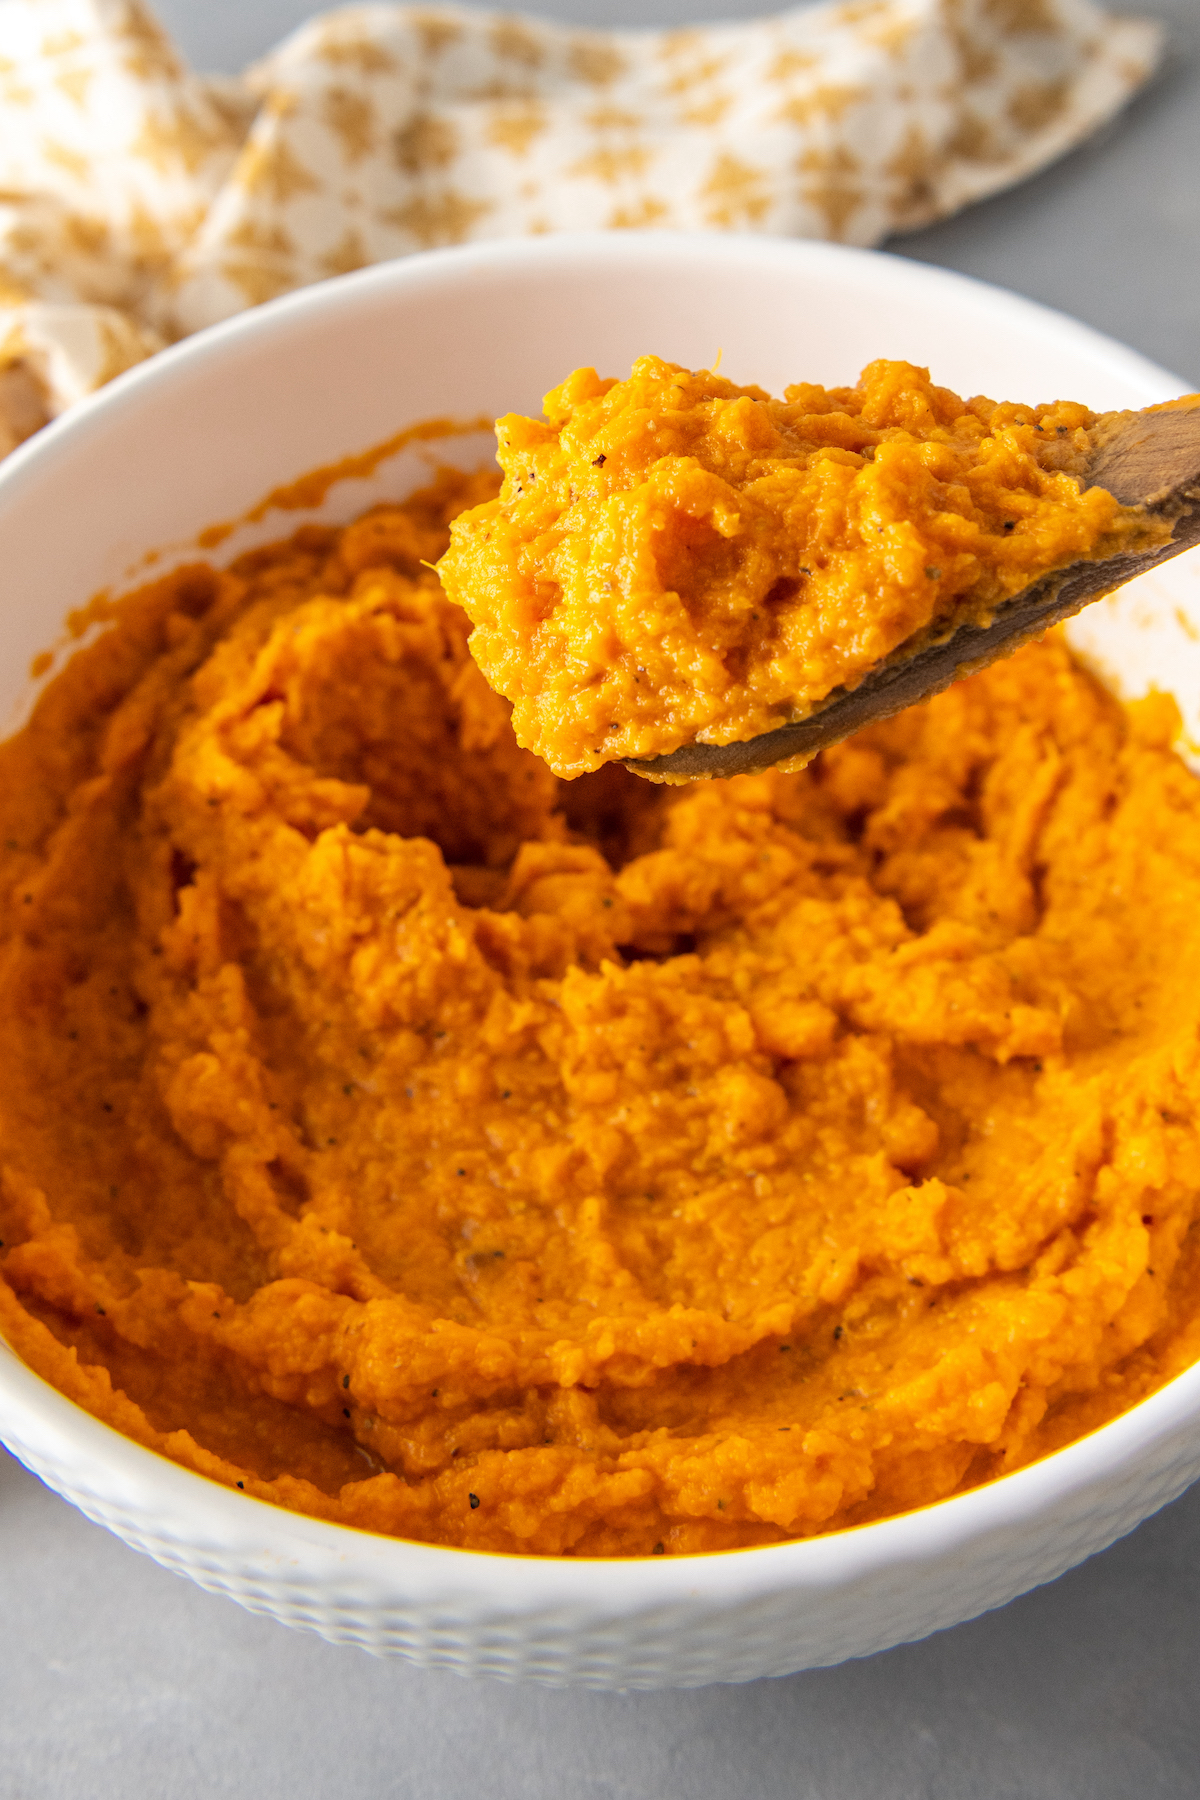 Mashed sweet potatoes in a bowl with seasonings with a wooden spoon scooping up some sweet potatoes.